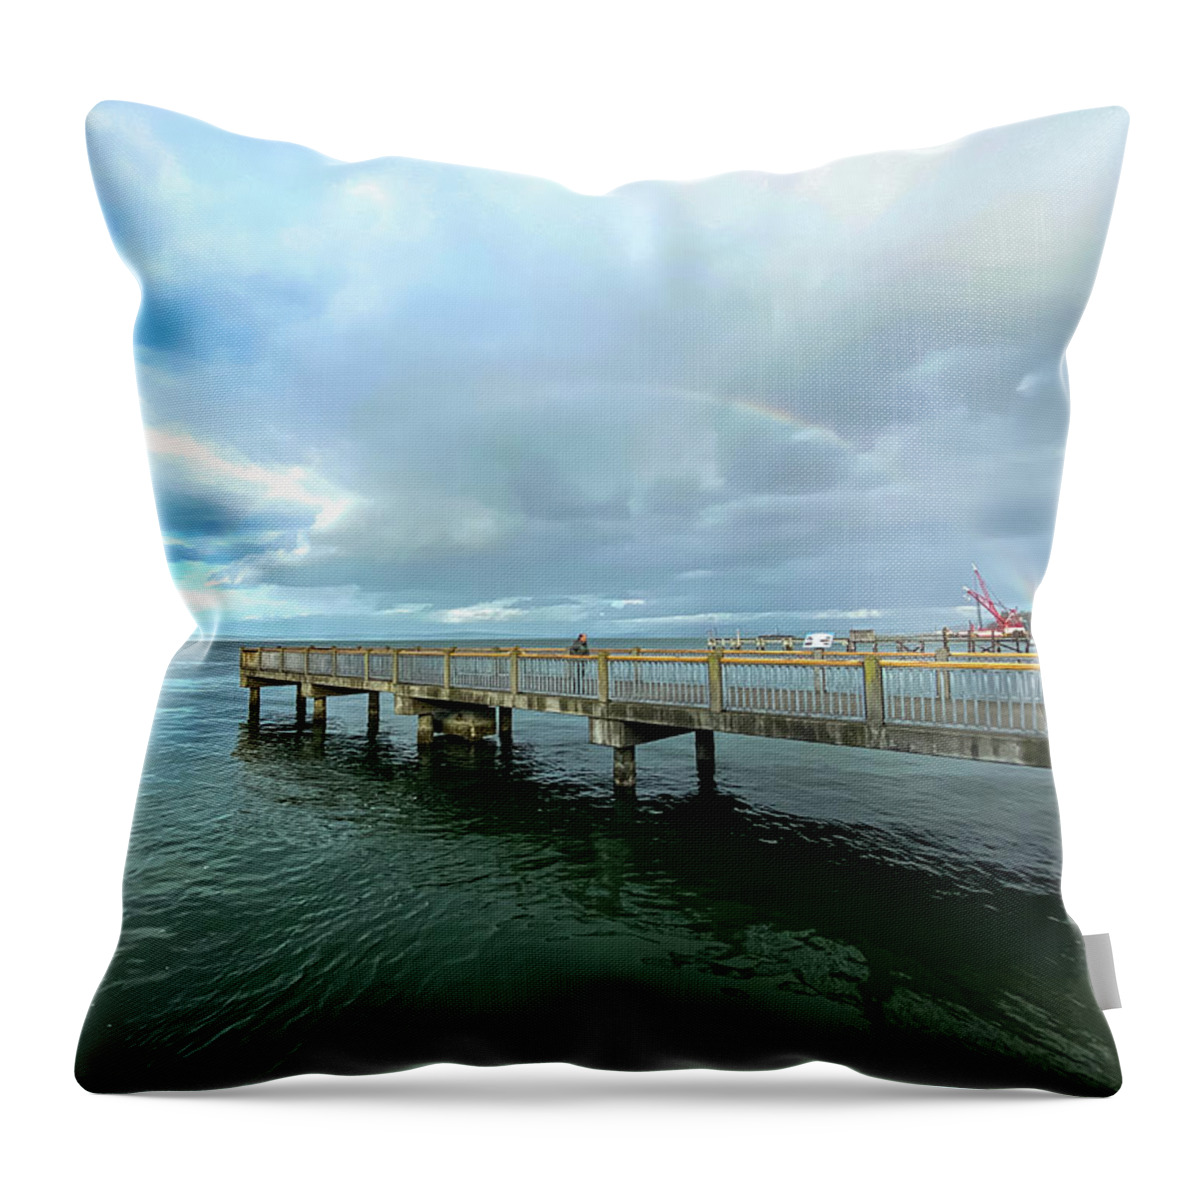 Rainbow Throw Pillow featuring the photograph Complete Rainbow by Anamar Pictures